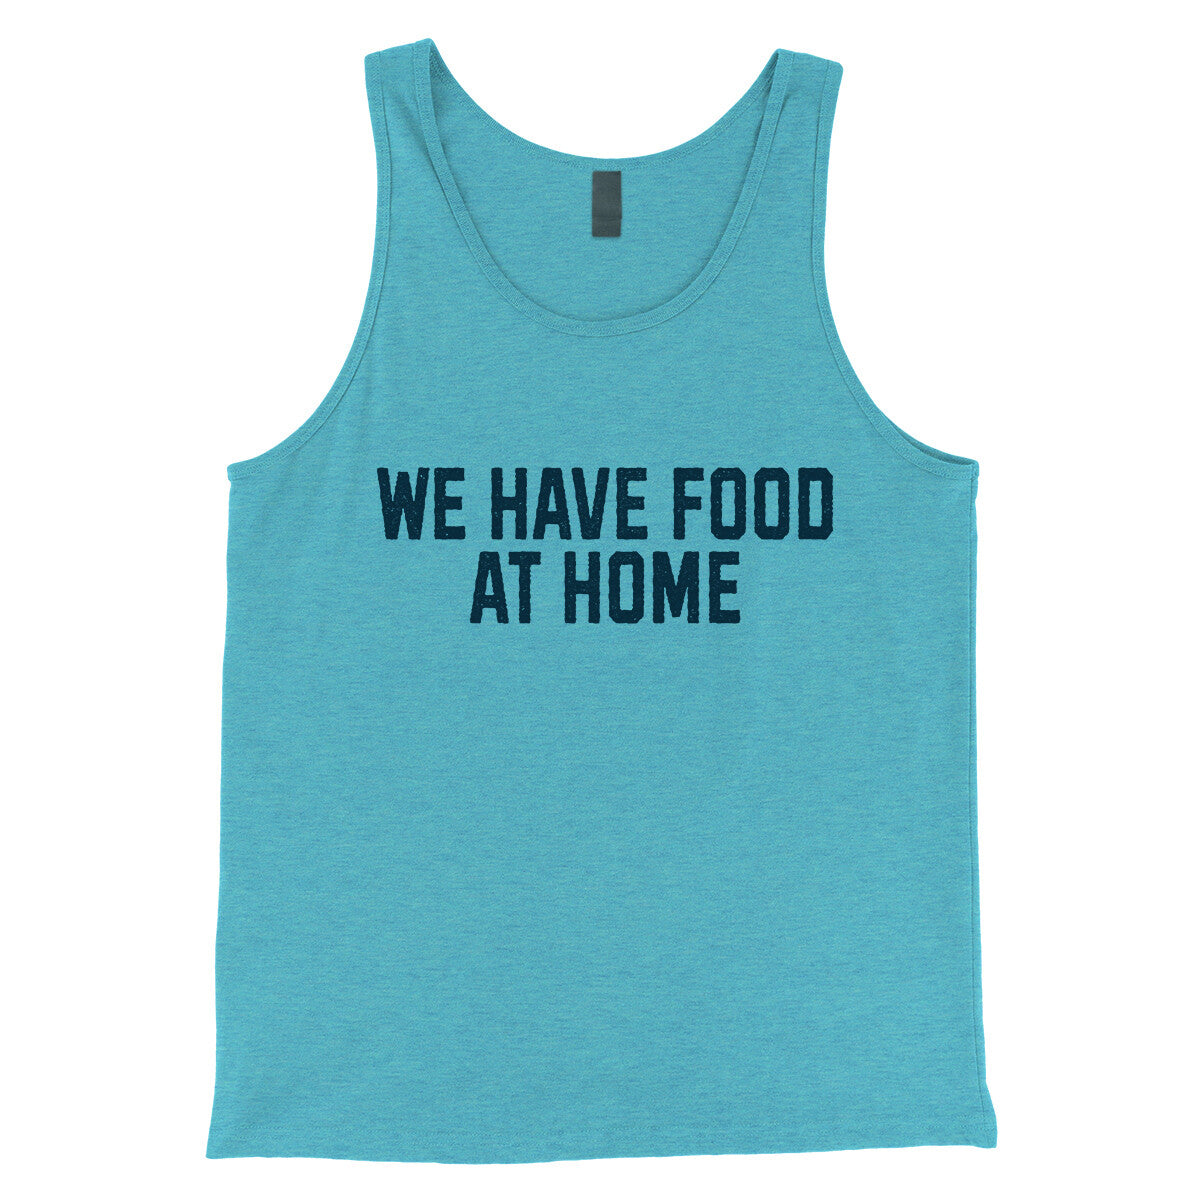 We Have Food at Home in Aqua Triblend Color